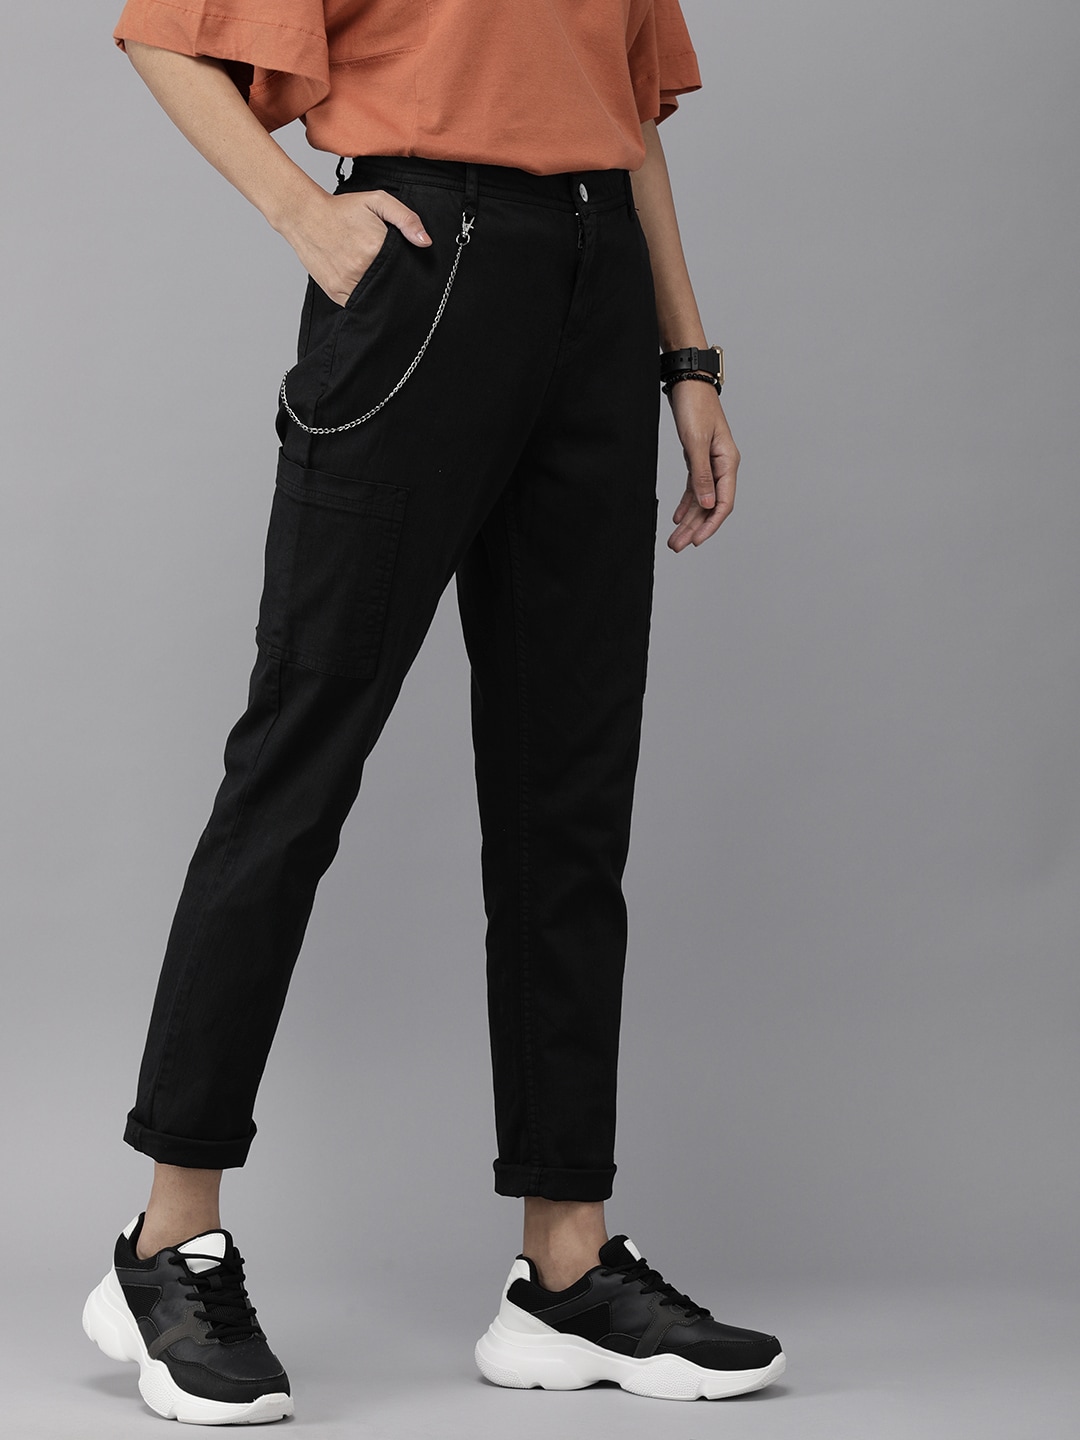 The Roadster Lifestyle Co Women Black Slim Fit High-Rise Trousers Price in India